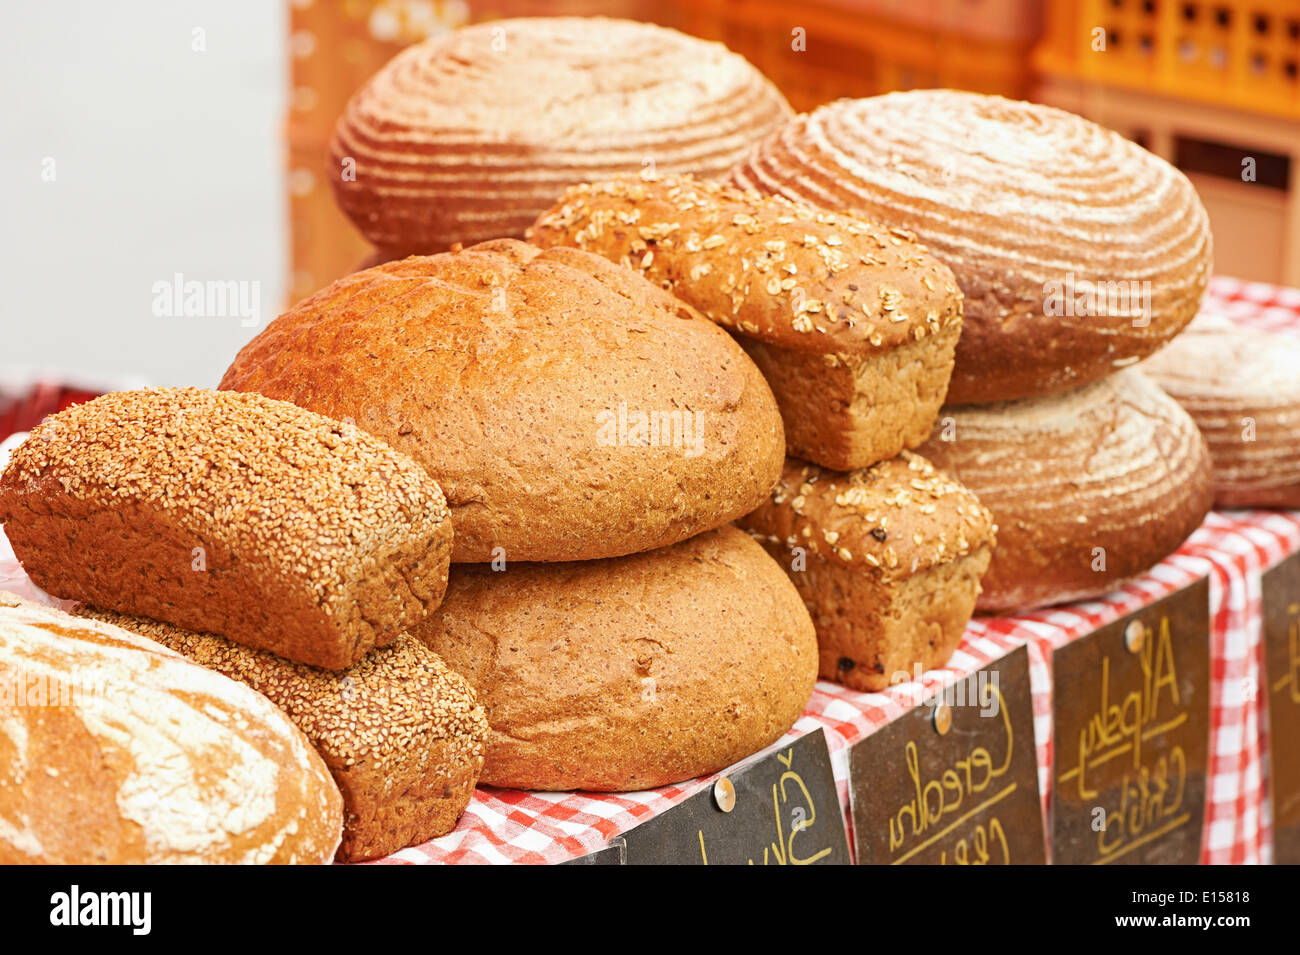 Assortment of baked bread on table Stock Photo